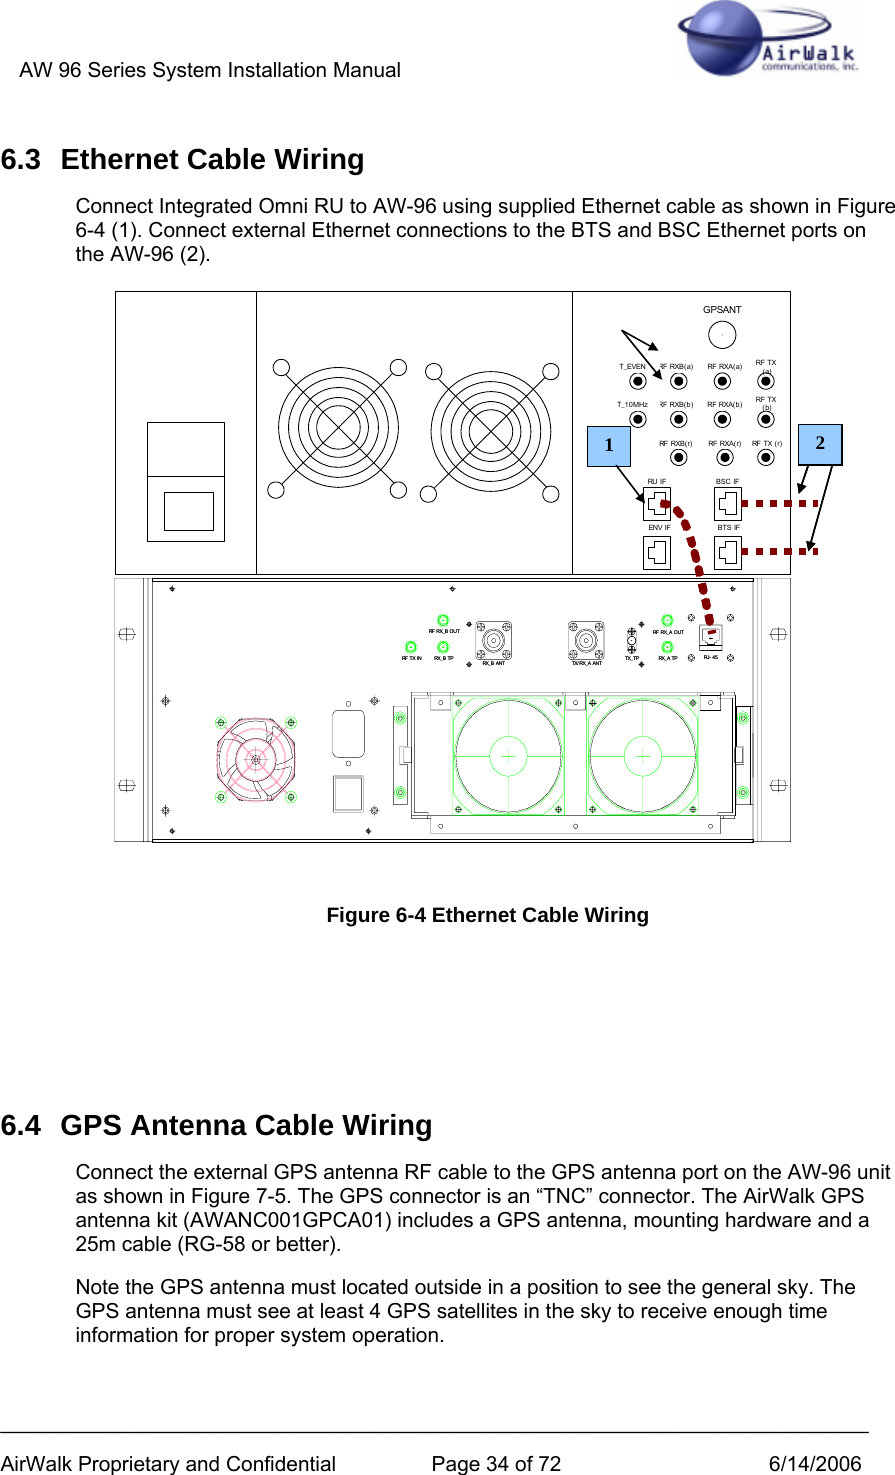 AW 96 Series System Installation Manual          ___________________________________________________________________________ AirWalk Proprietary and Confidential  Page 34 of 72  6/14/2006 6.3  Ethernet Cable Wiring Connect Integrated Omni RU to AW-96 using supplied Ethernet cable as shown in Figure 6-4 (1). Connect external Ethernet connections to the BTS and BSC Ethernet ports on the AW-96 (2).              Figure 6-4 Ethernet Cable Wiring    6.4  GPS Antenna Cable Wiring Connect the external GPS antenna RF cable to the GPS antenna port on the AW-96 unit as shown in Figure 7-5. The GPS connector is an “TNC” connector. The AirWalk GPS antenna kit (AWANC001GPCA01) includes a GPS antenna, mounting hardware and a 25m cable (RG-58 or better). Note the GPS antenna must located outside in a position to see the general sky. The GPS antenna must see at least 4 GPS satellites in the sky to receive enough time information for proper system operation.  GPSANTRF  RXB(a ) RF  RXA( a) RF  TX (a)RF  RXB( b) RF  RXA(b ) RF TX (b)RF  RXB(r ) RF  RXA( r) RF  TX  (r )T_EVENT_10MHzRU  IF BSC IFENV IF  BTS IFRF  RX_ A  OUTRJ- 45RX_A  TPTX/ RX_A  ANTTX_TPRF  TX I NRF  RX_ B  OU TRX_ B  ANTRX_B  TP12GPSANTRF  RXB(a ) RF  RXA( a) RF  TX (a)RF  RXB( b) RF  RXA(b ) RF TX (b)RF  RXB(r ) RF  RXA( r) RF  TX  (r )T_EVENT_10MHzRU  IF BSC IFENV IF  BTS IFRF  RX_ A  OUTRJ- 45RX_A  TPTX/ RX_A  ANTTX_TPRF  TX I NRF  RX_ B  OU TRX_ B  ANTRX_B  TP12